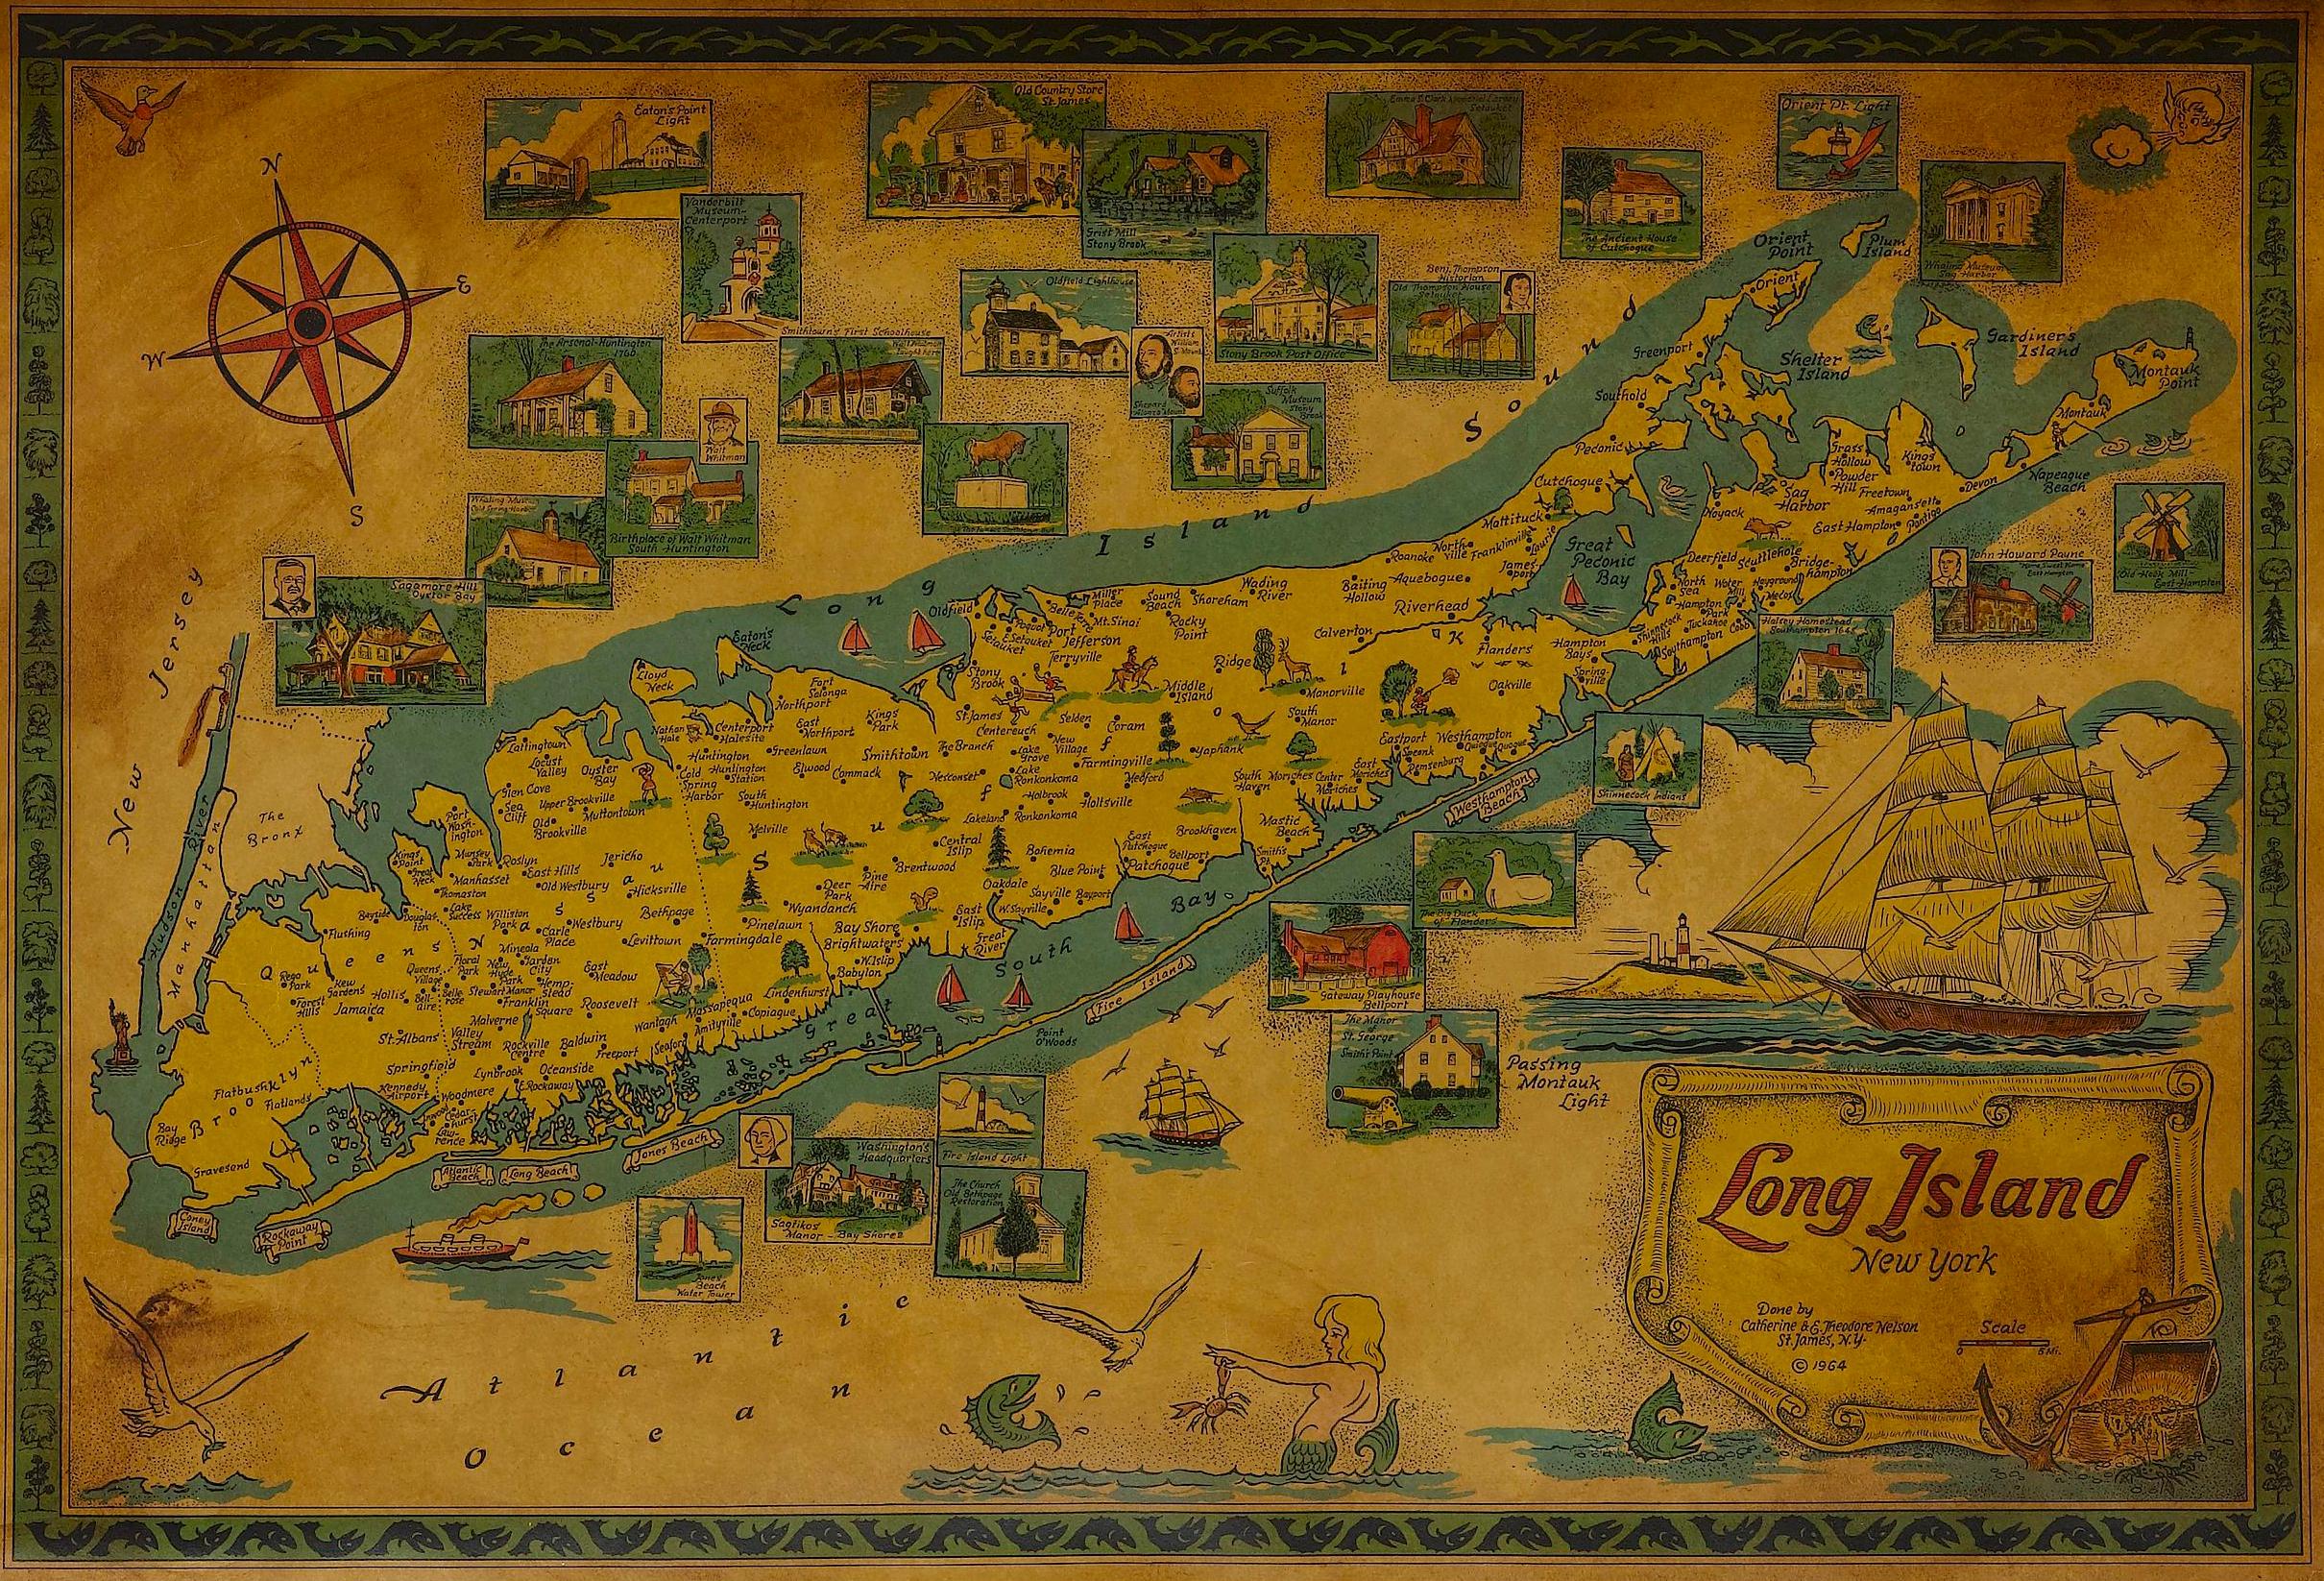 Presented is a colorful and whimsical pictorial map of Long Island. The map was illustrated and published by creative husband and wife duo Catherine Nelson and E. Theodor Nelson in St. James, New York, in 1964. The map is a photo-process print and